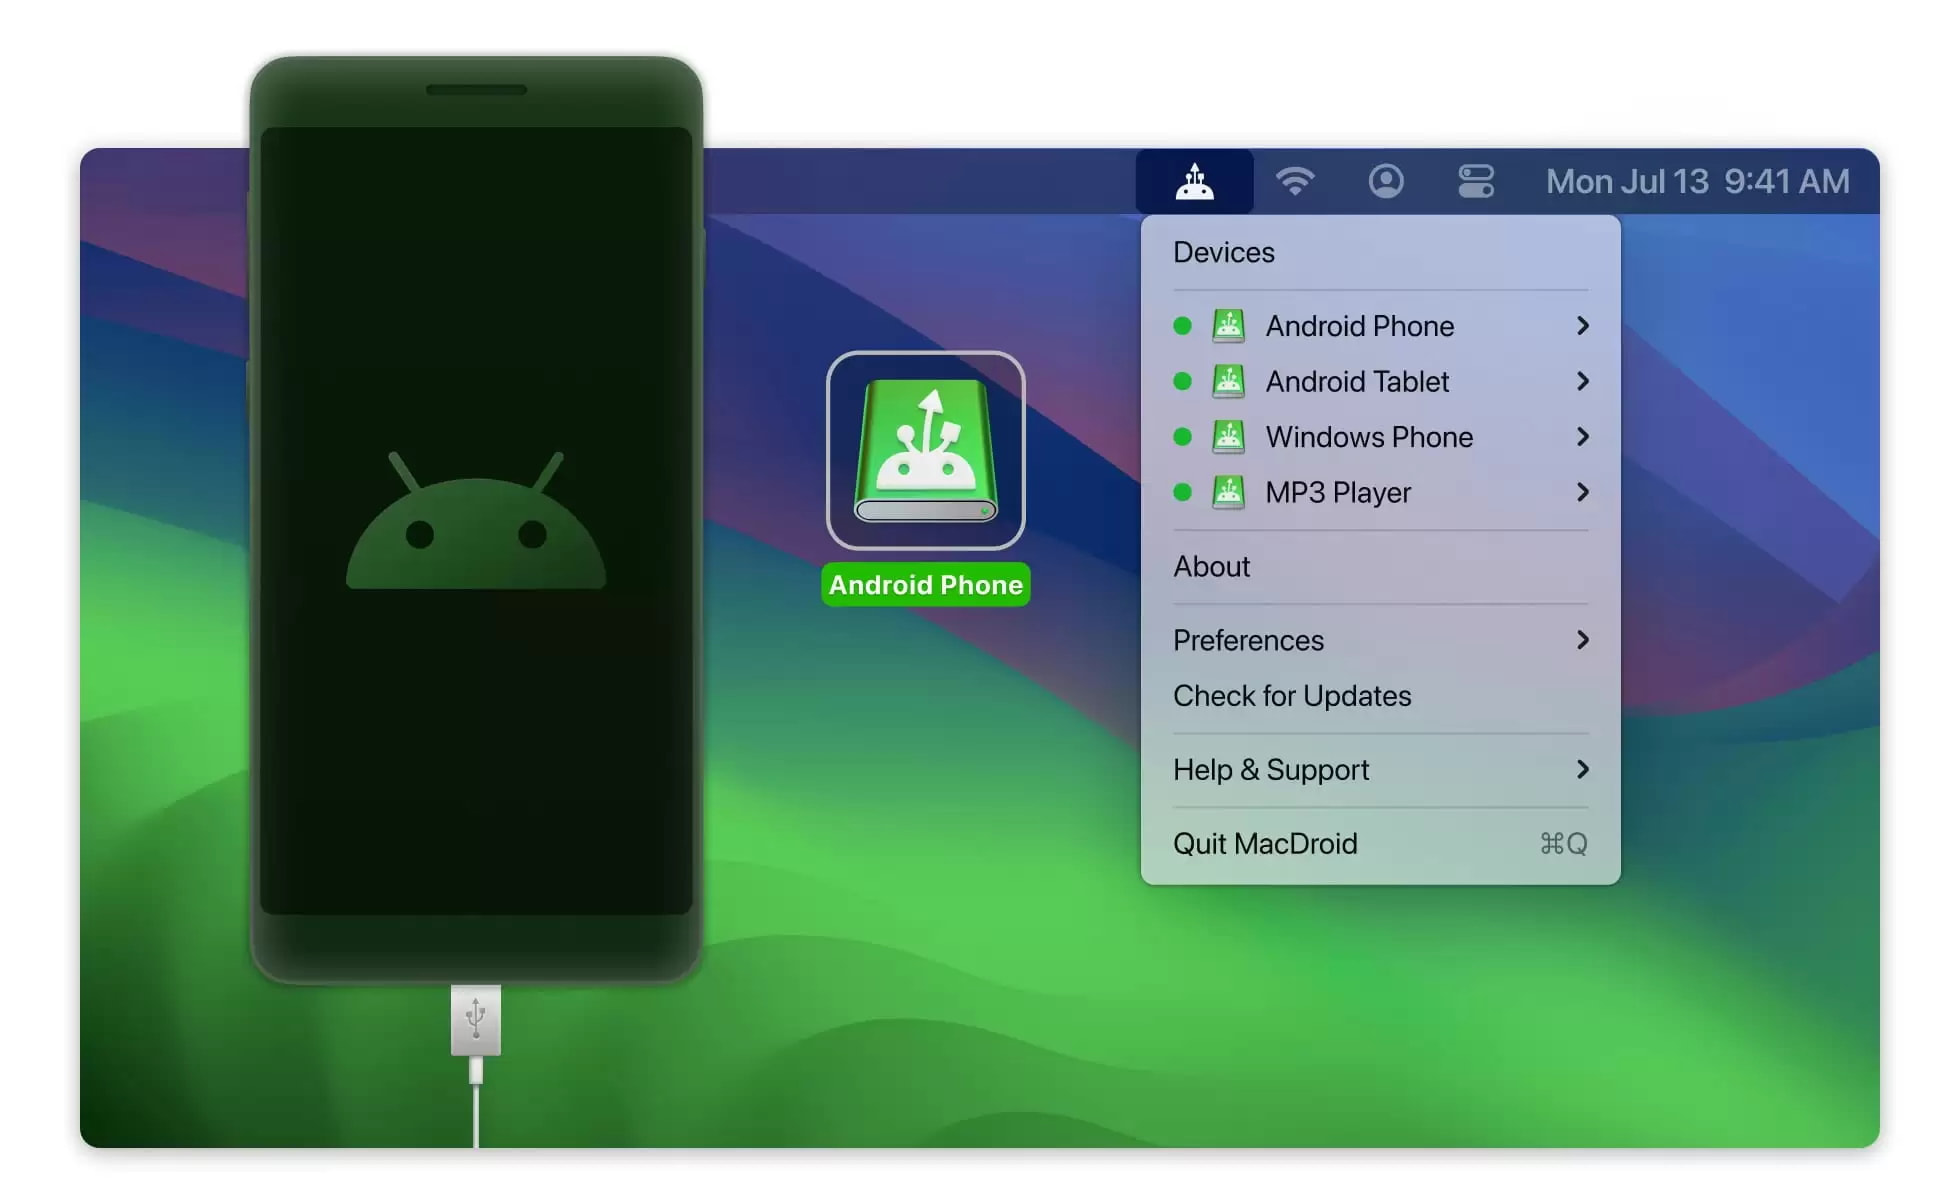 MacDroid supports all Android devices and is very easy to use